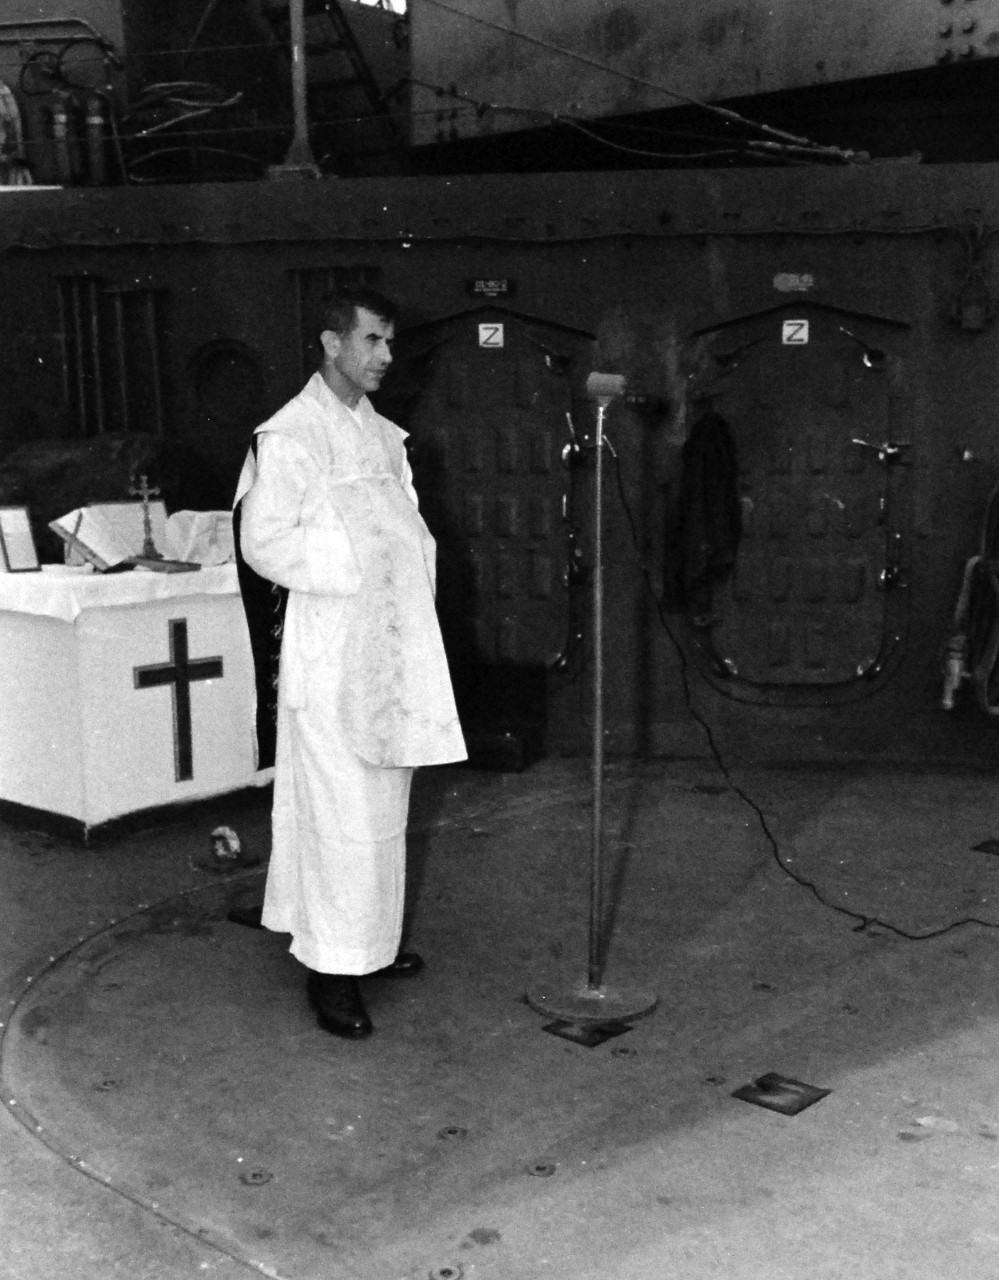 80-G-344563:  Allied Prisoners of War, 1945.    Major Albert W. Braun, U.S. Army Chaplain, holding divine services aboard ship.  Major Braun was captured by the Japanese at Corregidor on May 5, 1942, but the Japanese allowed him to conduct services in bath houses and Philippine natives helped getting altar supplies for him.  Photograph released September 24, 1945.  Official U.S. Navy photograph, now in the collections of the National Archives.   (2015/11/24).